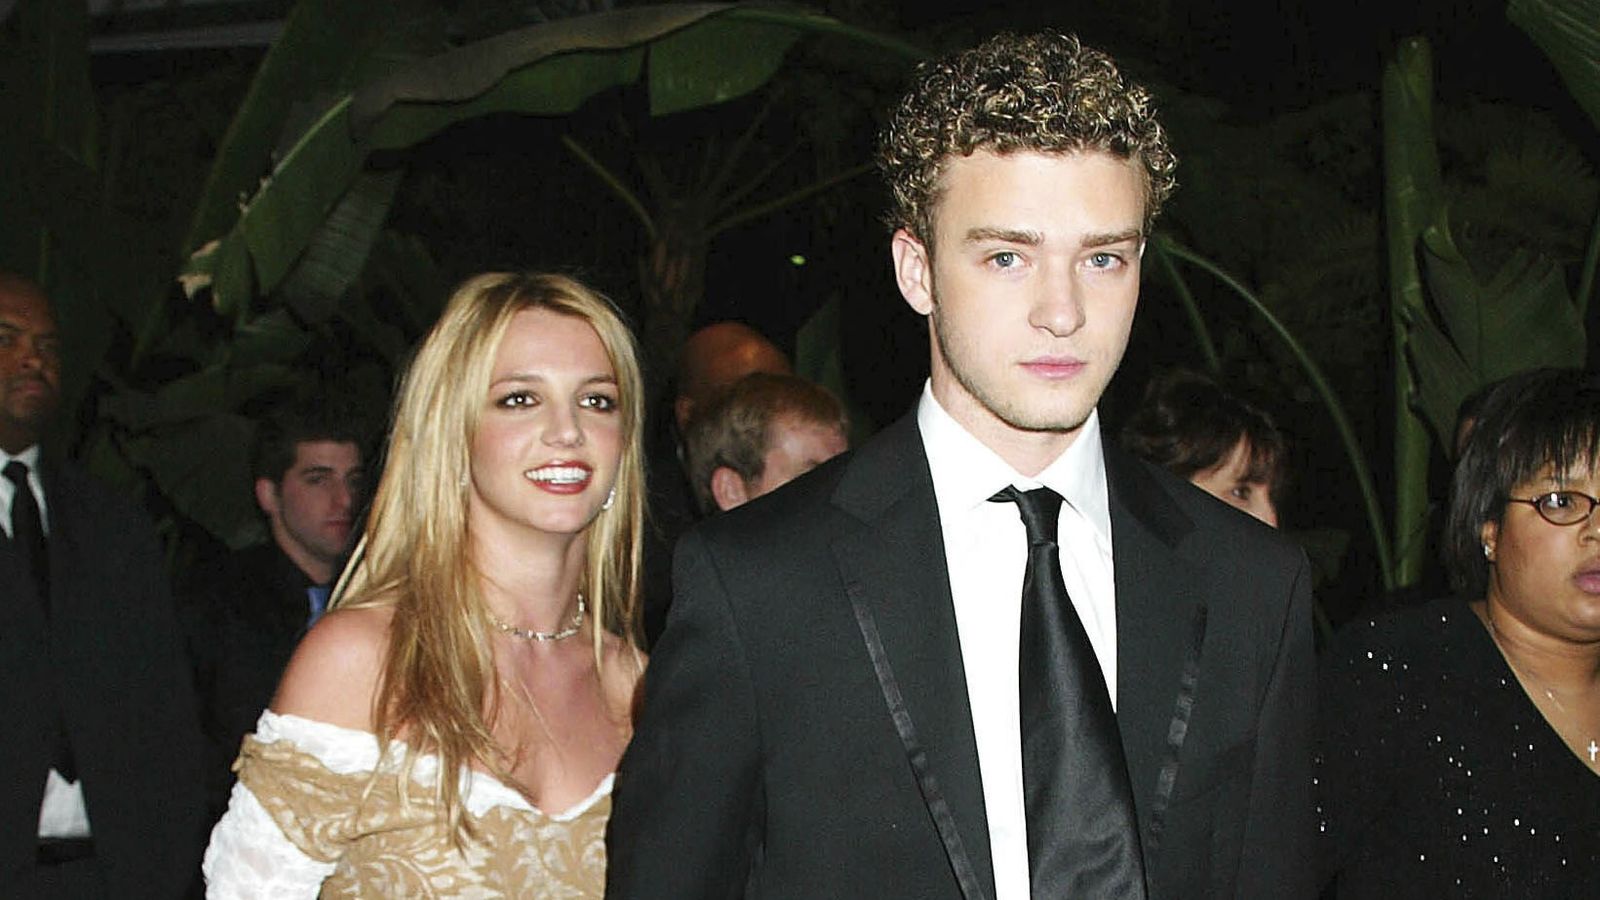 Britney Spears deletes her apology to Justin Timberlake after his statements during the concert |  Arts and arts news